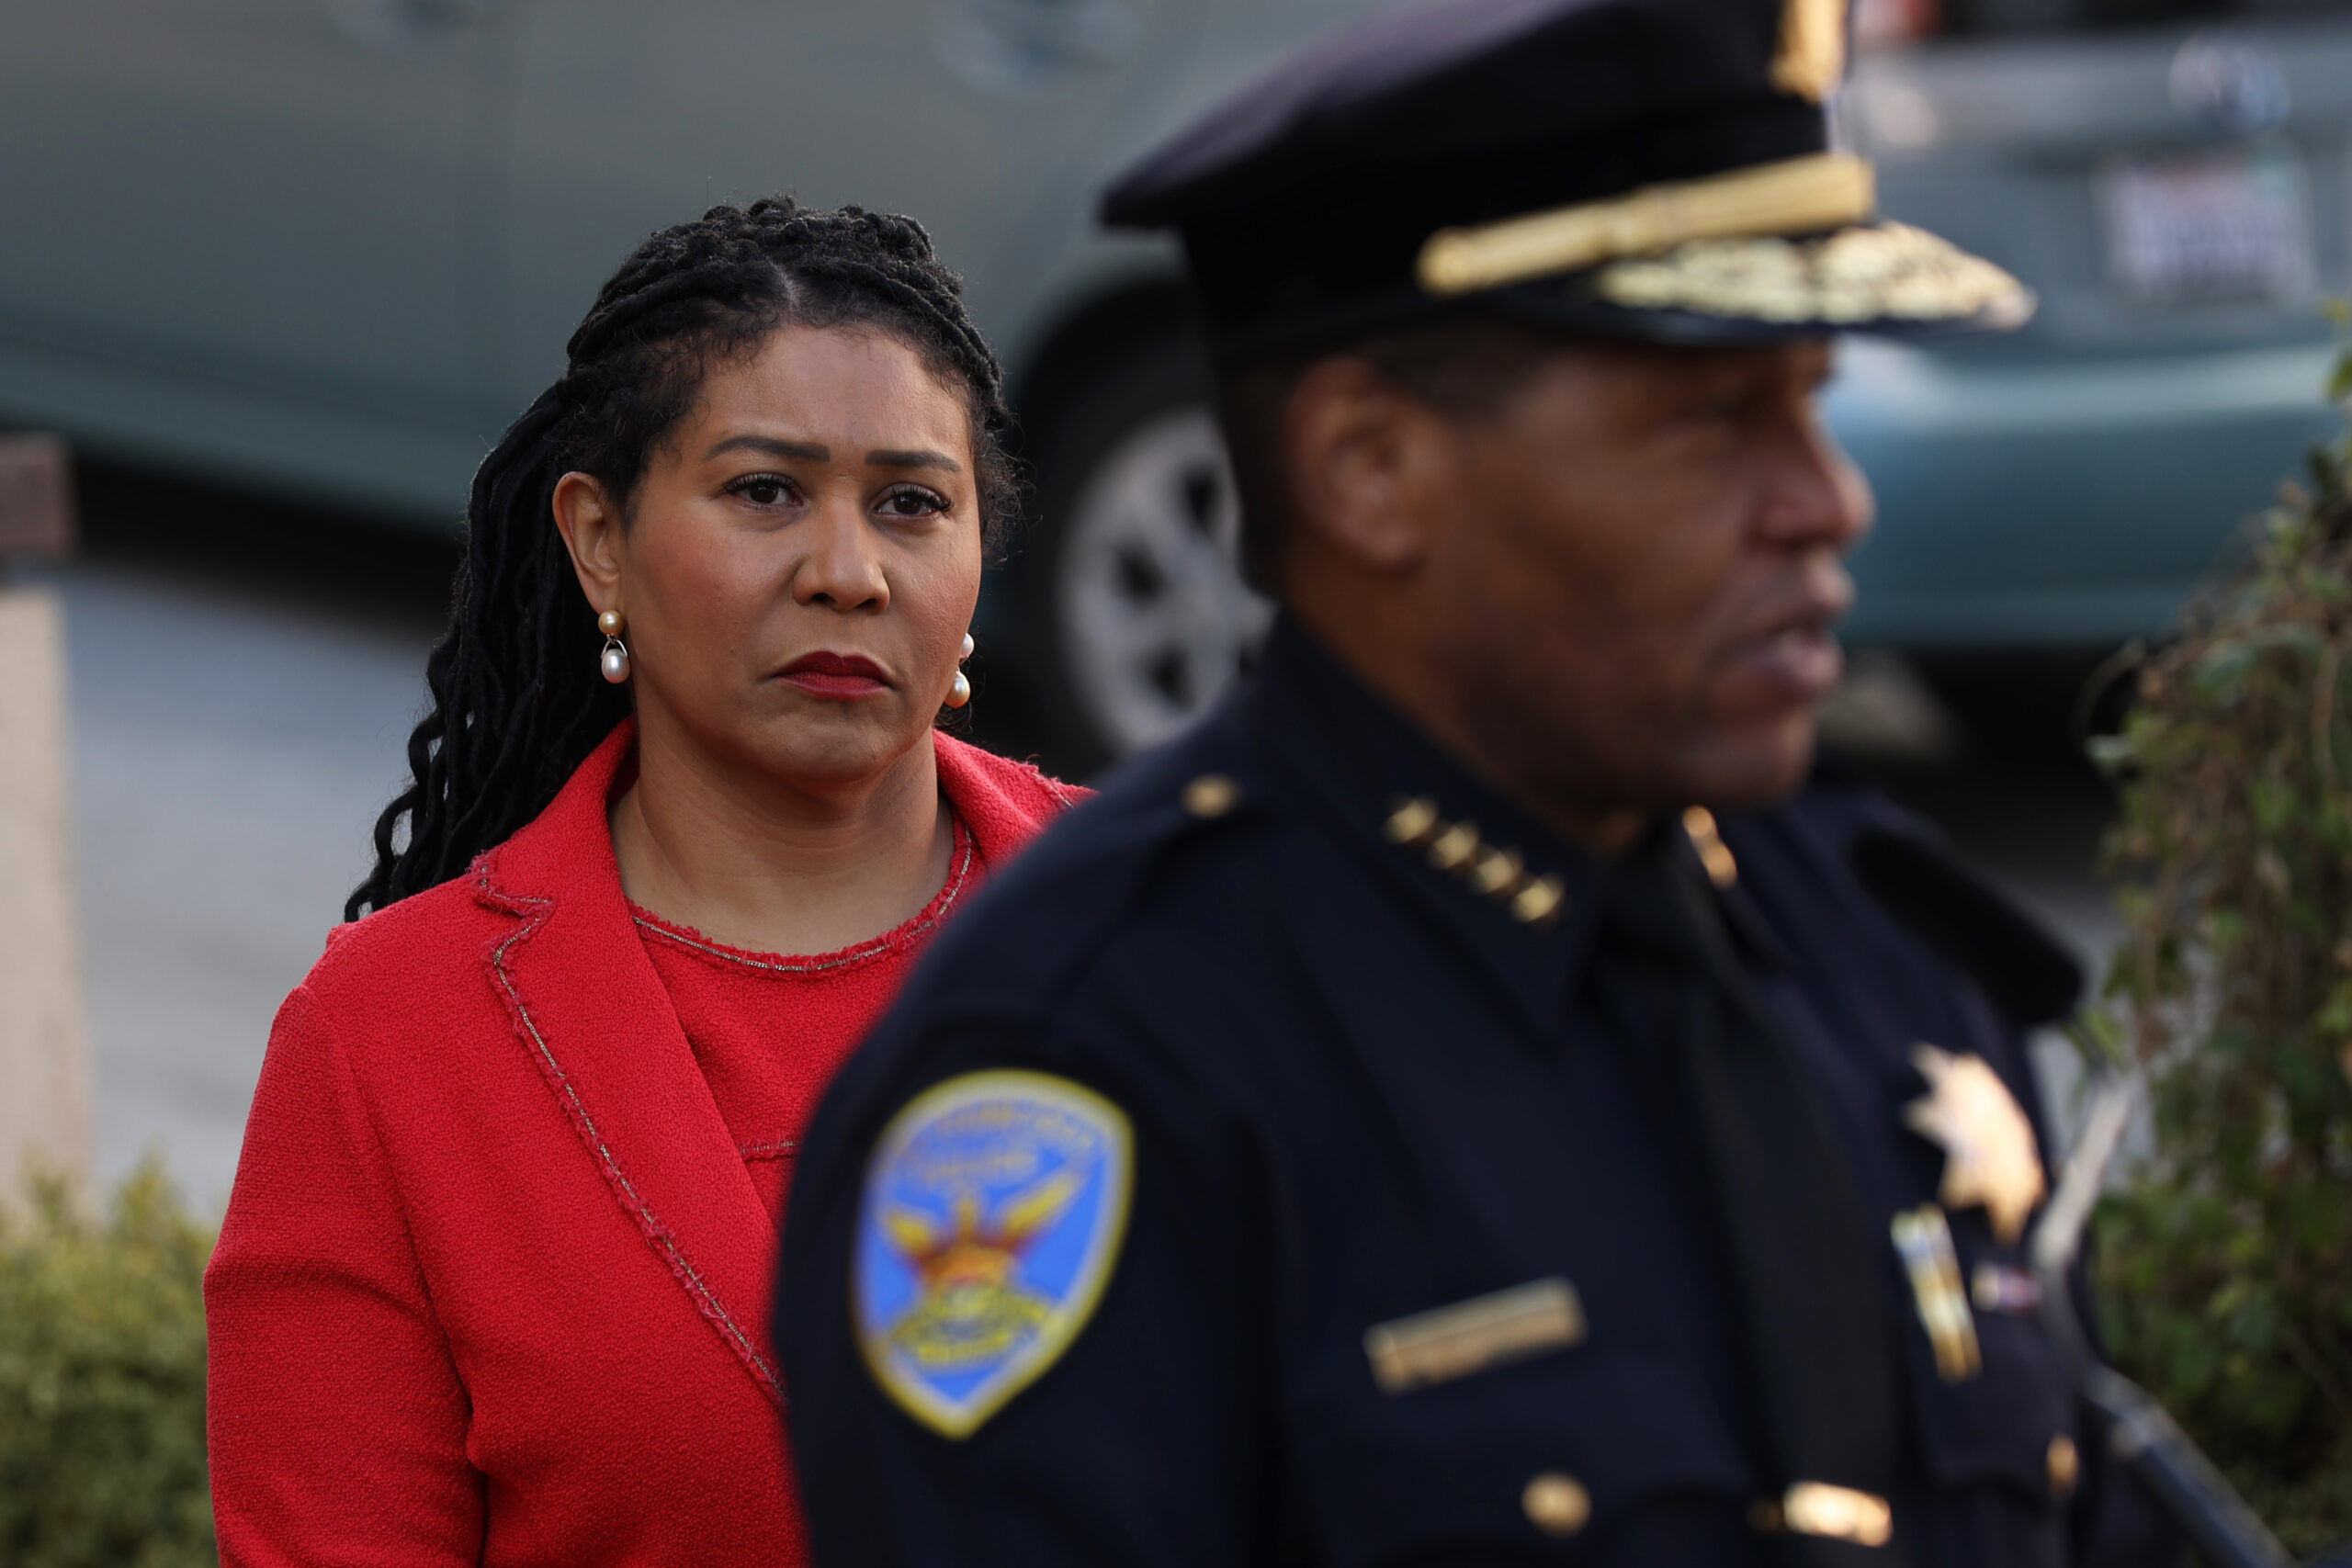 A woman in a red coat appears pensive beside a blurred man in police uniform.